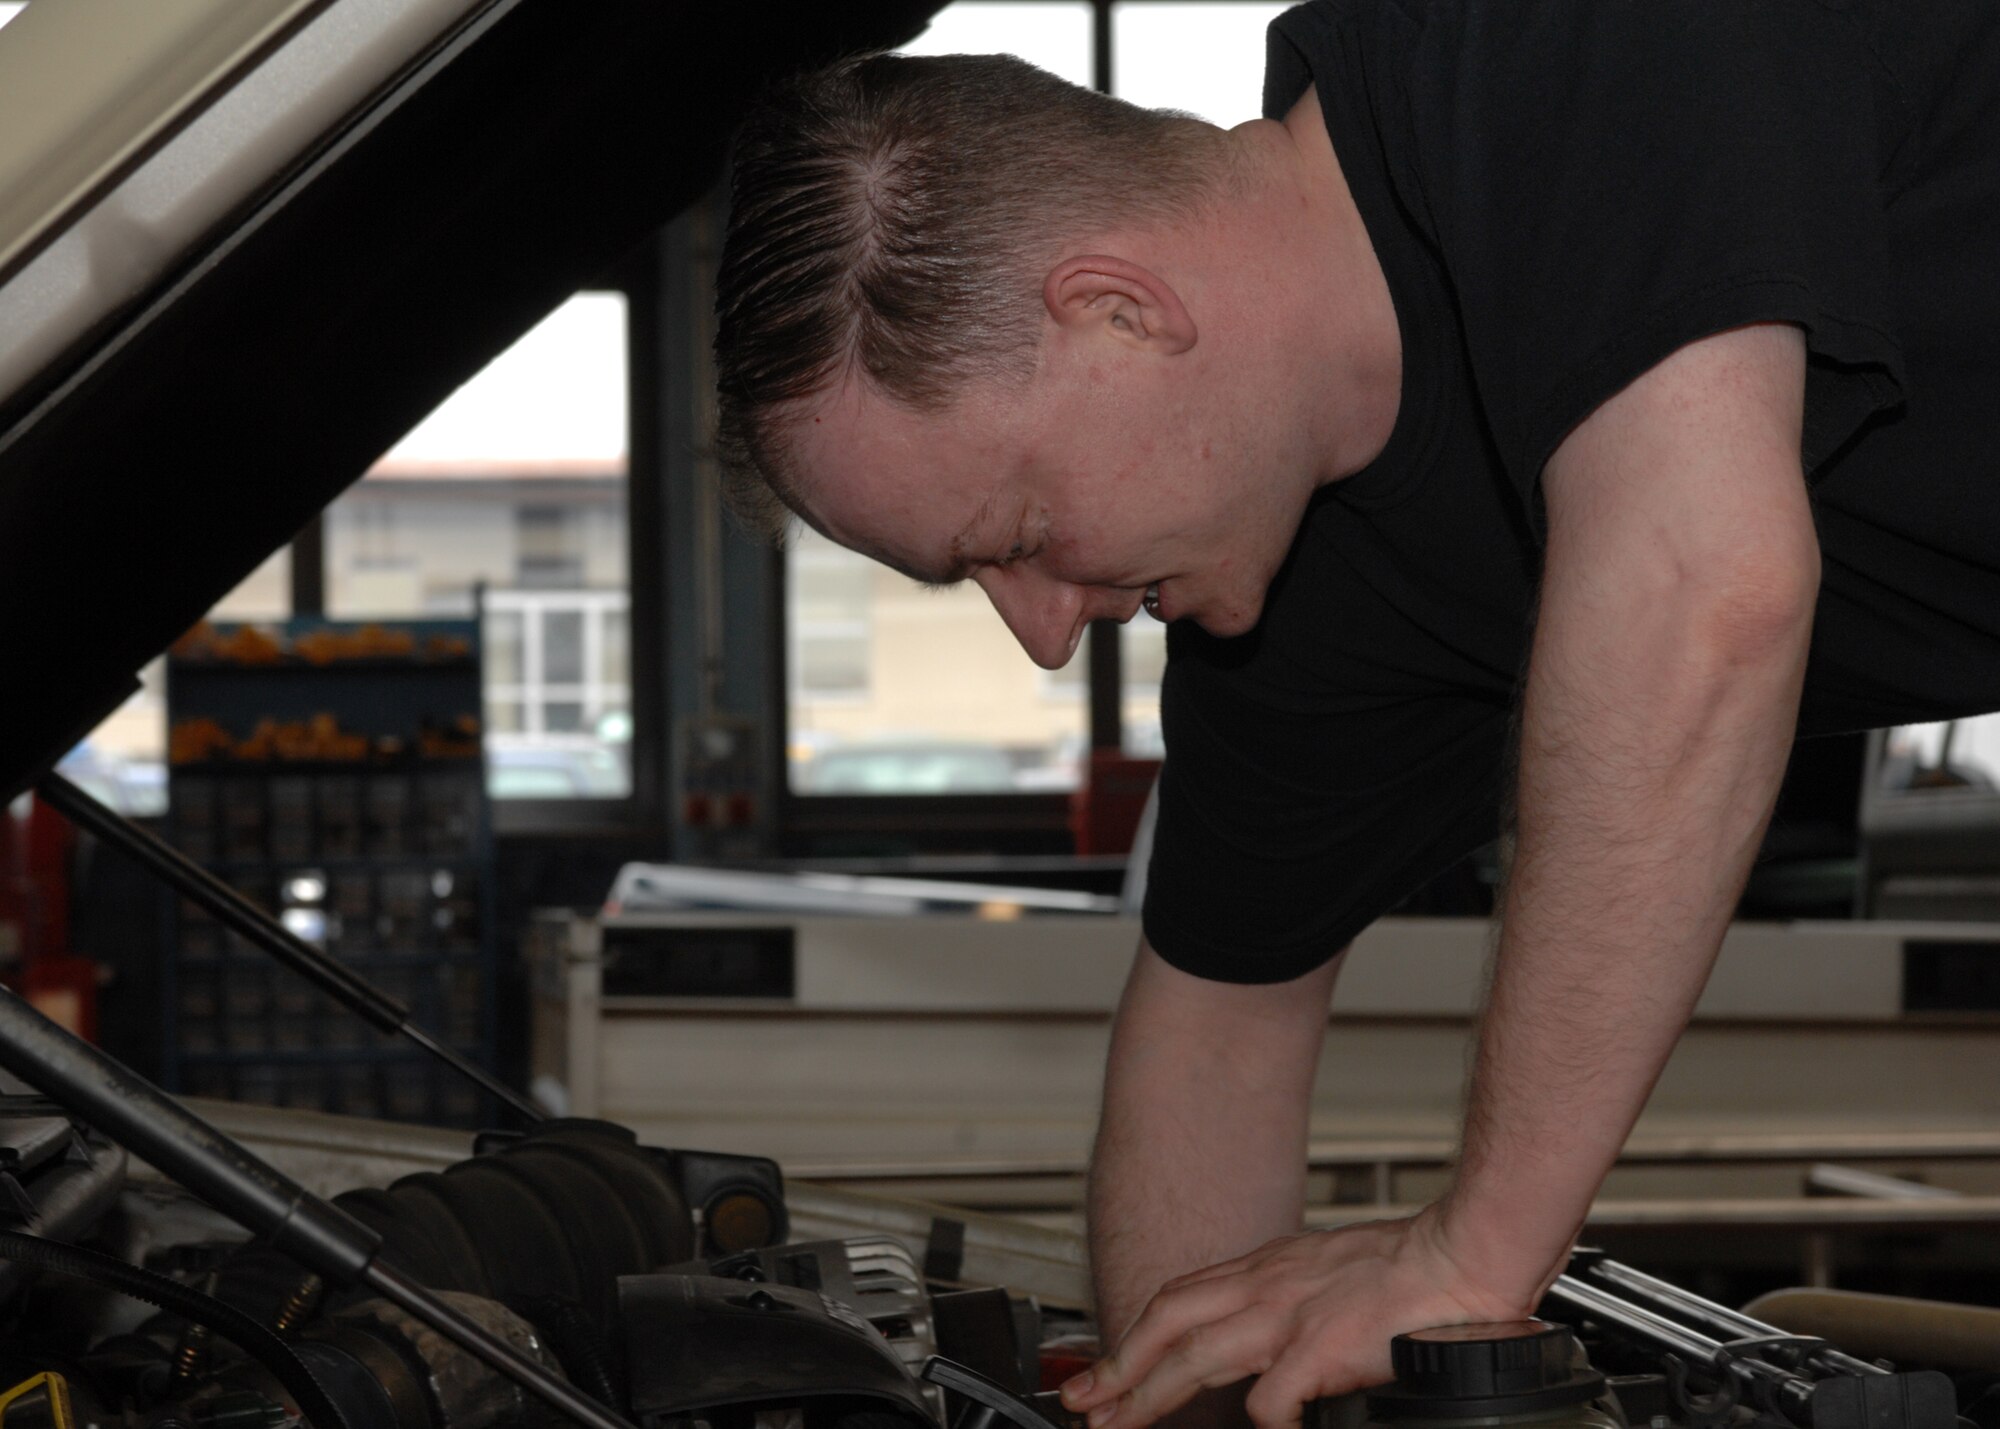 SPANGDAHLEM AIR BASE, Germany – Tech. Sgt. Nathan Nielsen, 52nd Logistics Readiness Squadron, works on a truck at the vehicle maintenance shop April 14, 2008. Vehicle maintenance is one of the many shops here that has turned to the Air Force Smart Operations for the 21st Century program to elevate the strain of low manning through more efficient operations. (U.S Air Force photo/Airman 1st Class Jenifer Calhoun)